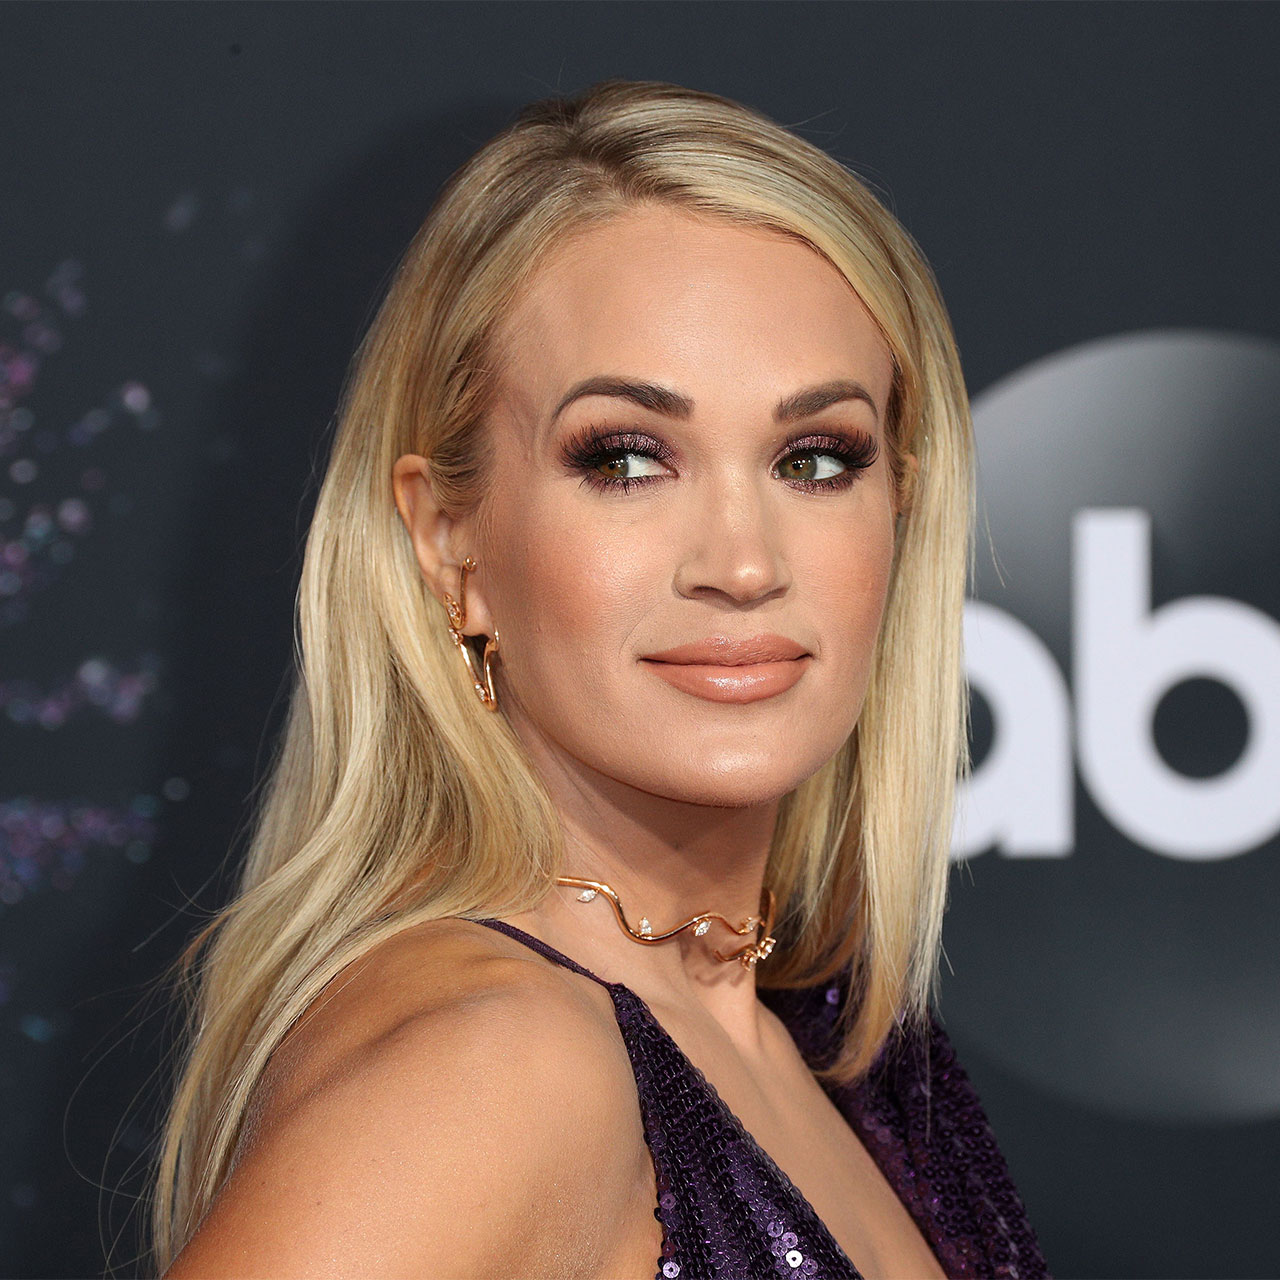 Carrie Underwood Leaves Fans Speechless In Nearly Invisible Micro Shorts At  Stagecoach Festival—Her Legs Are INSANE! - SHEfinds